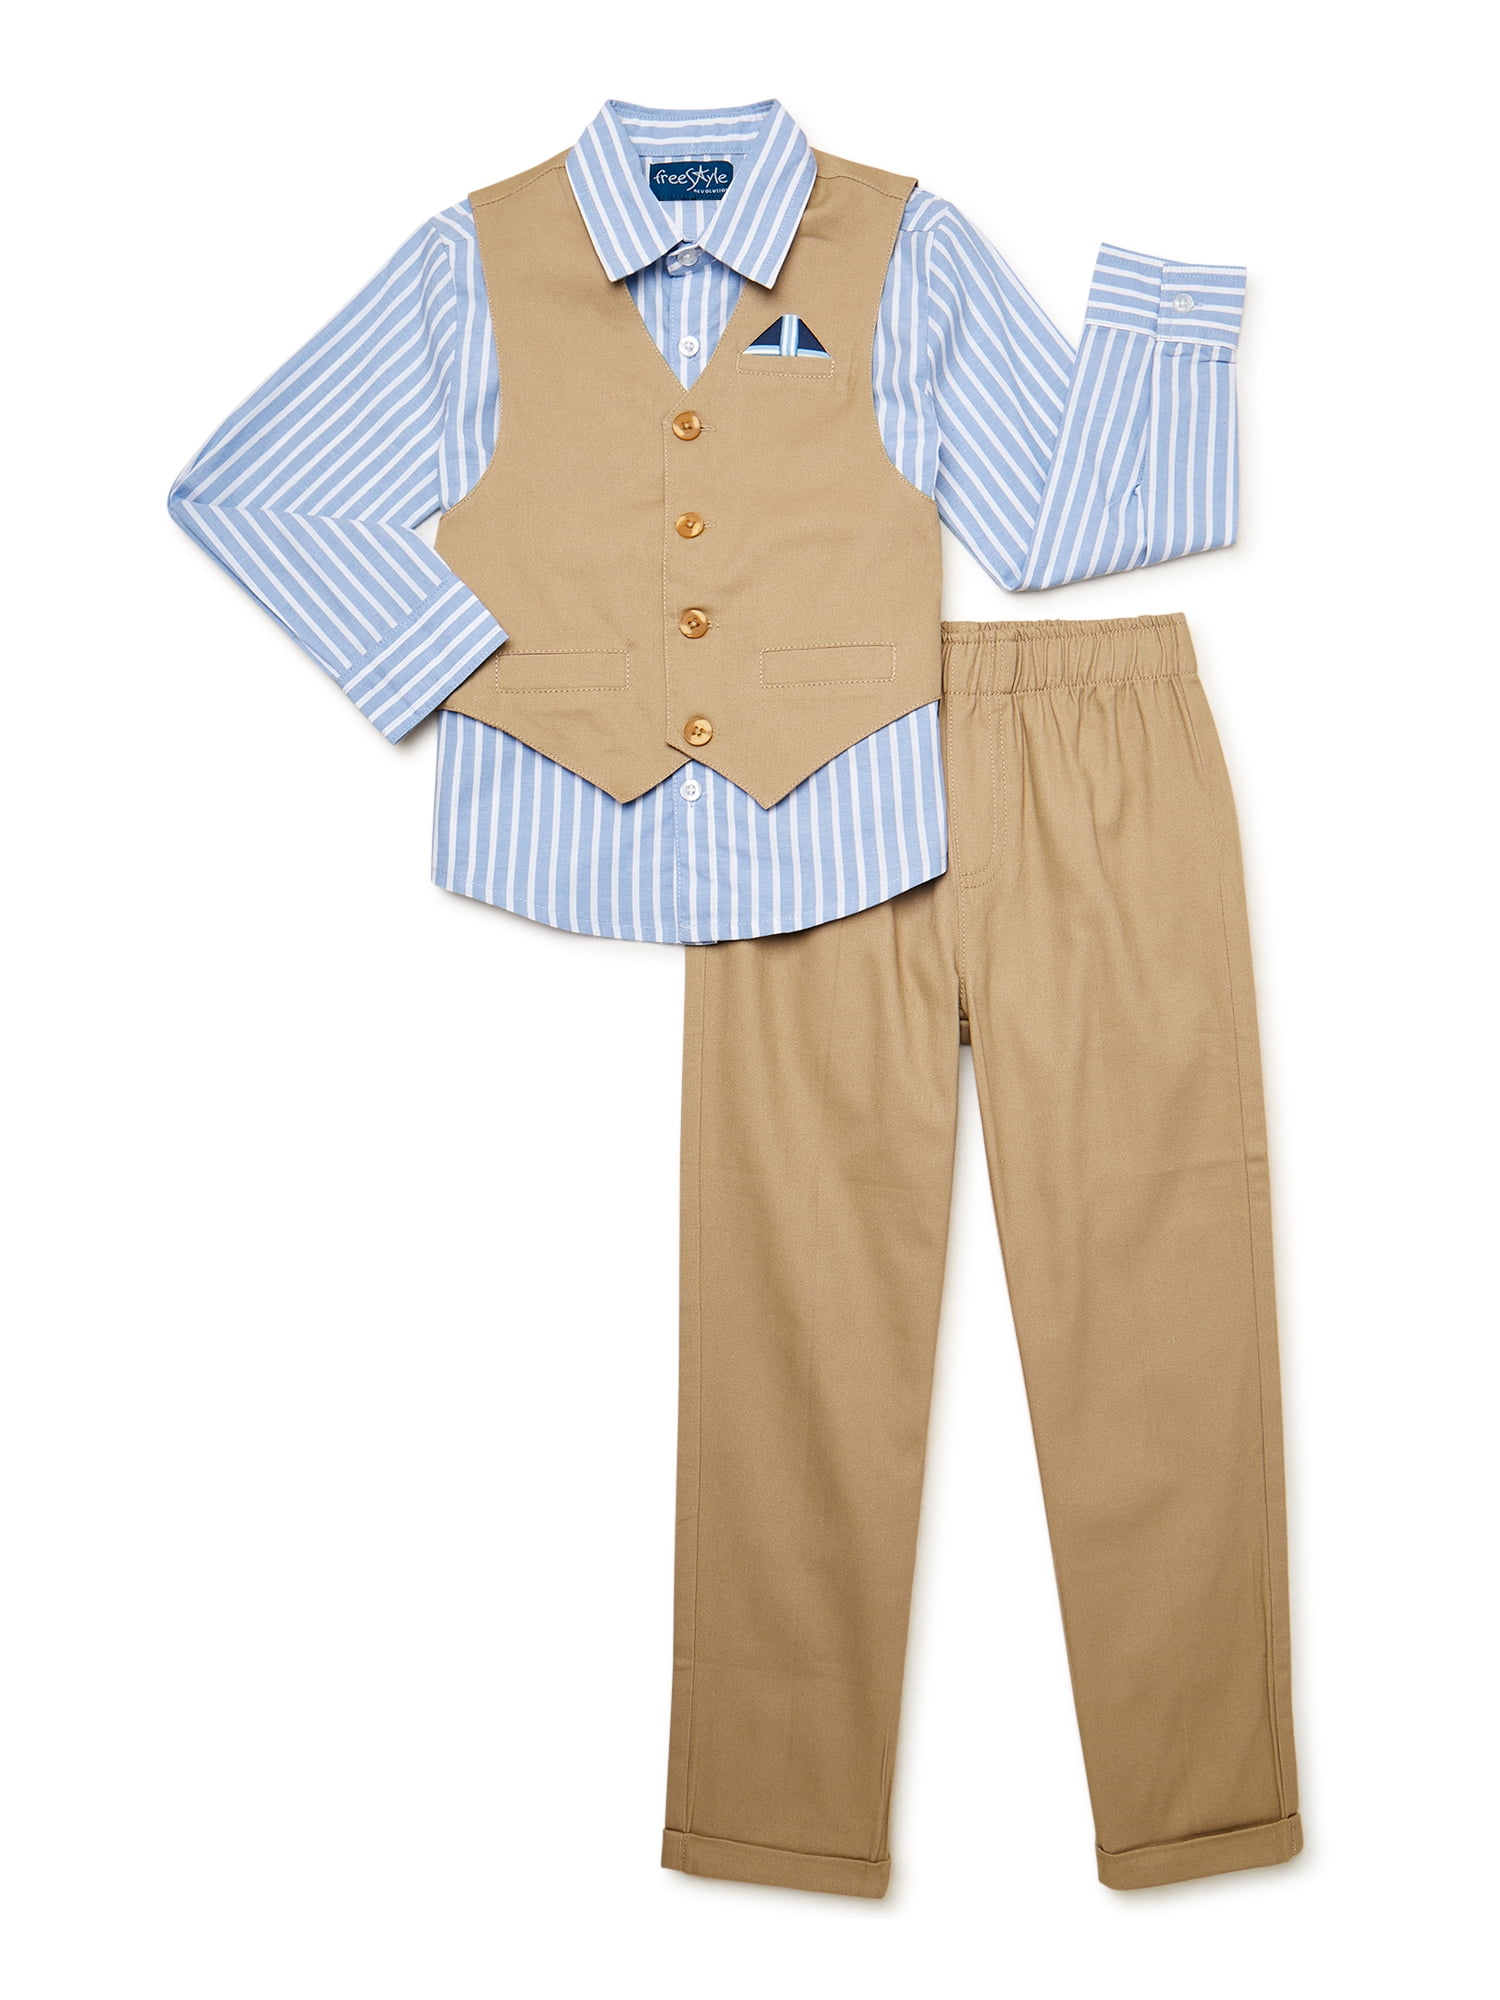 Buy Clothing Dress for Kids Boys, Coat, Pant and Shirt Set, Ideal for  Wedding at Amazon.in